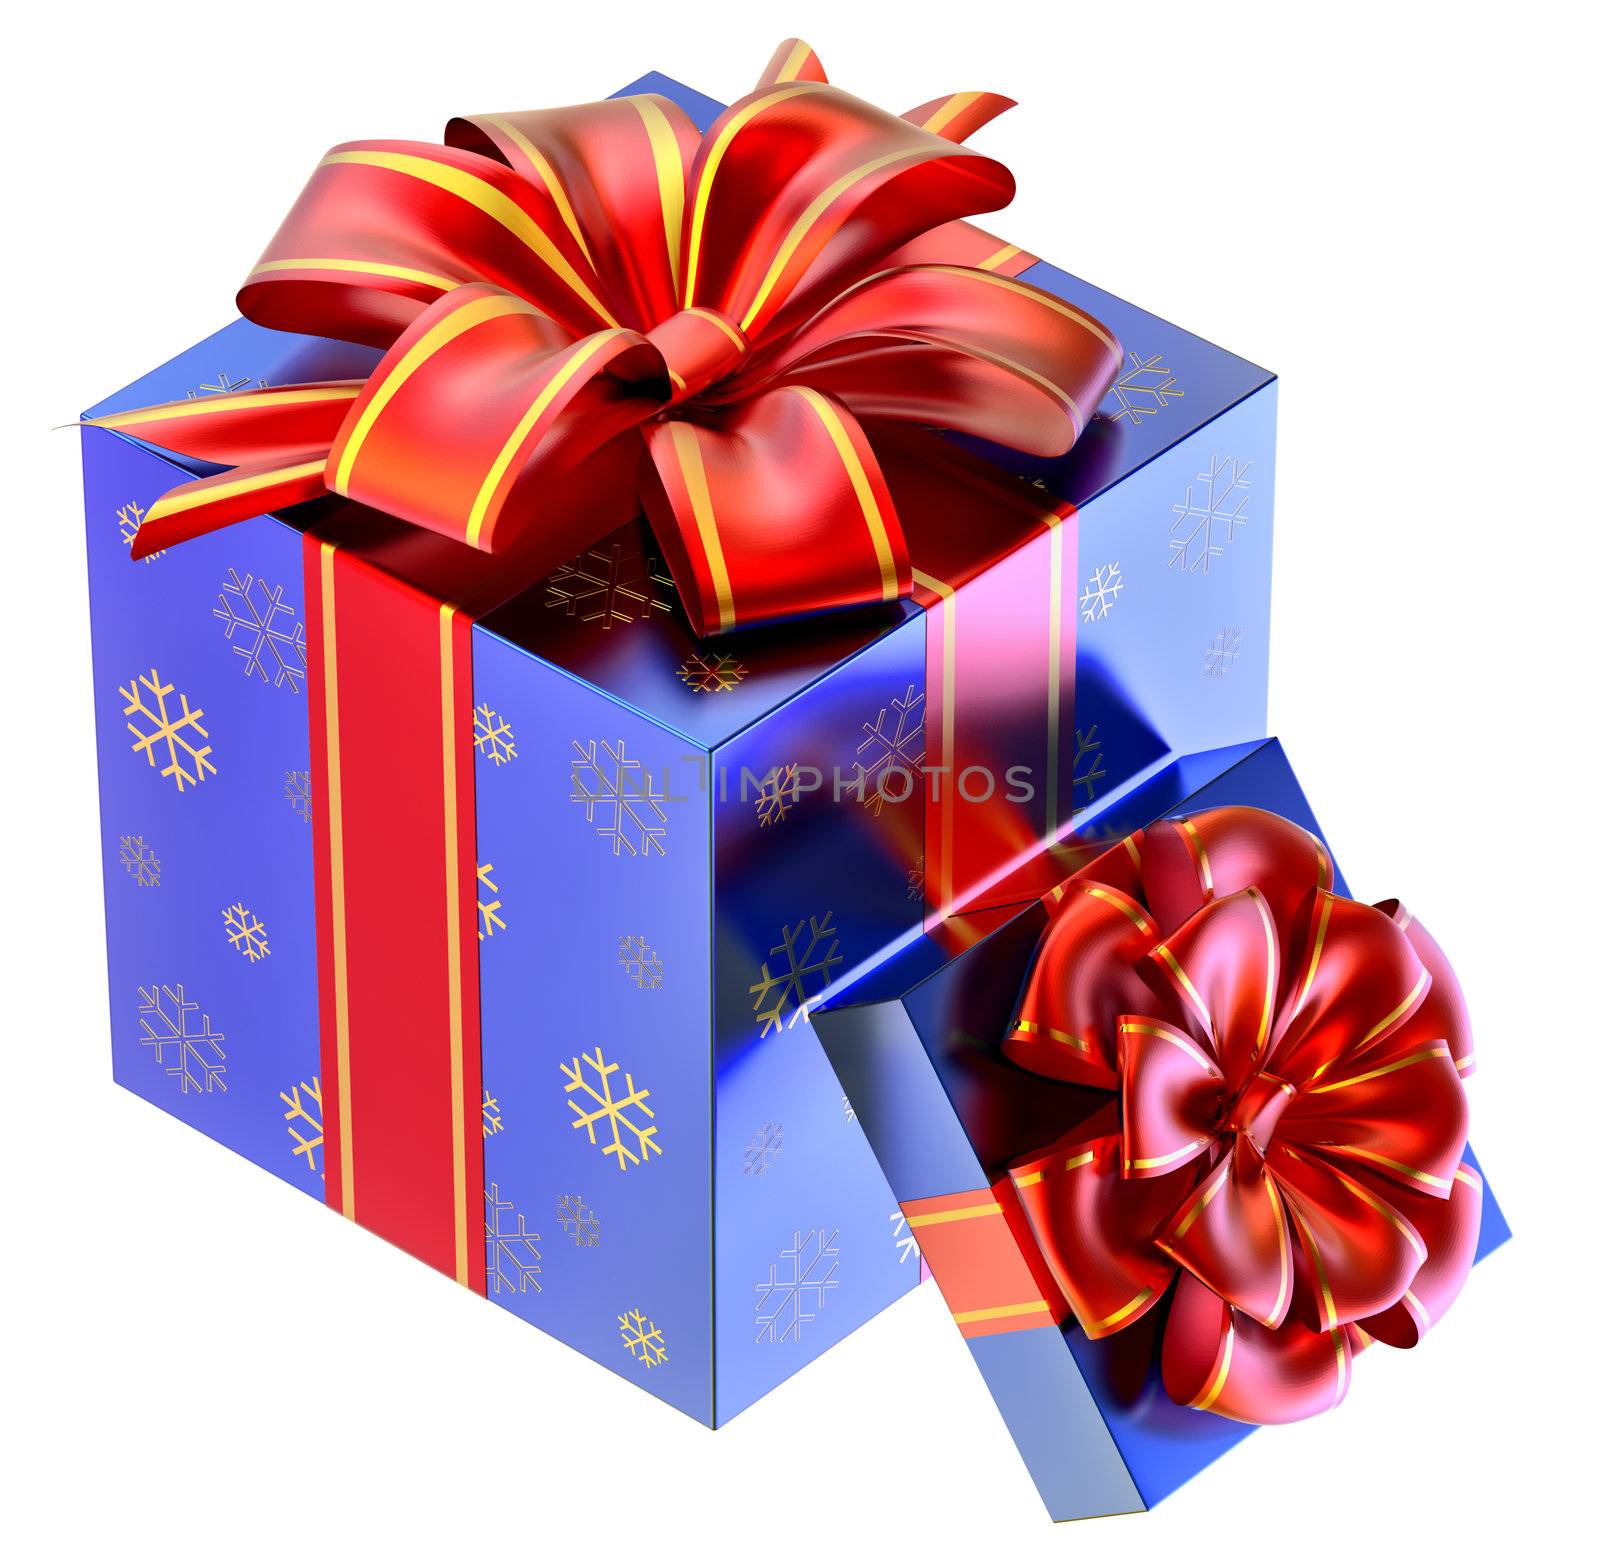 two blue boxes ornamented with the snowflakes and decorated by red bows as gifts